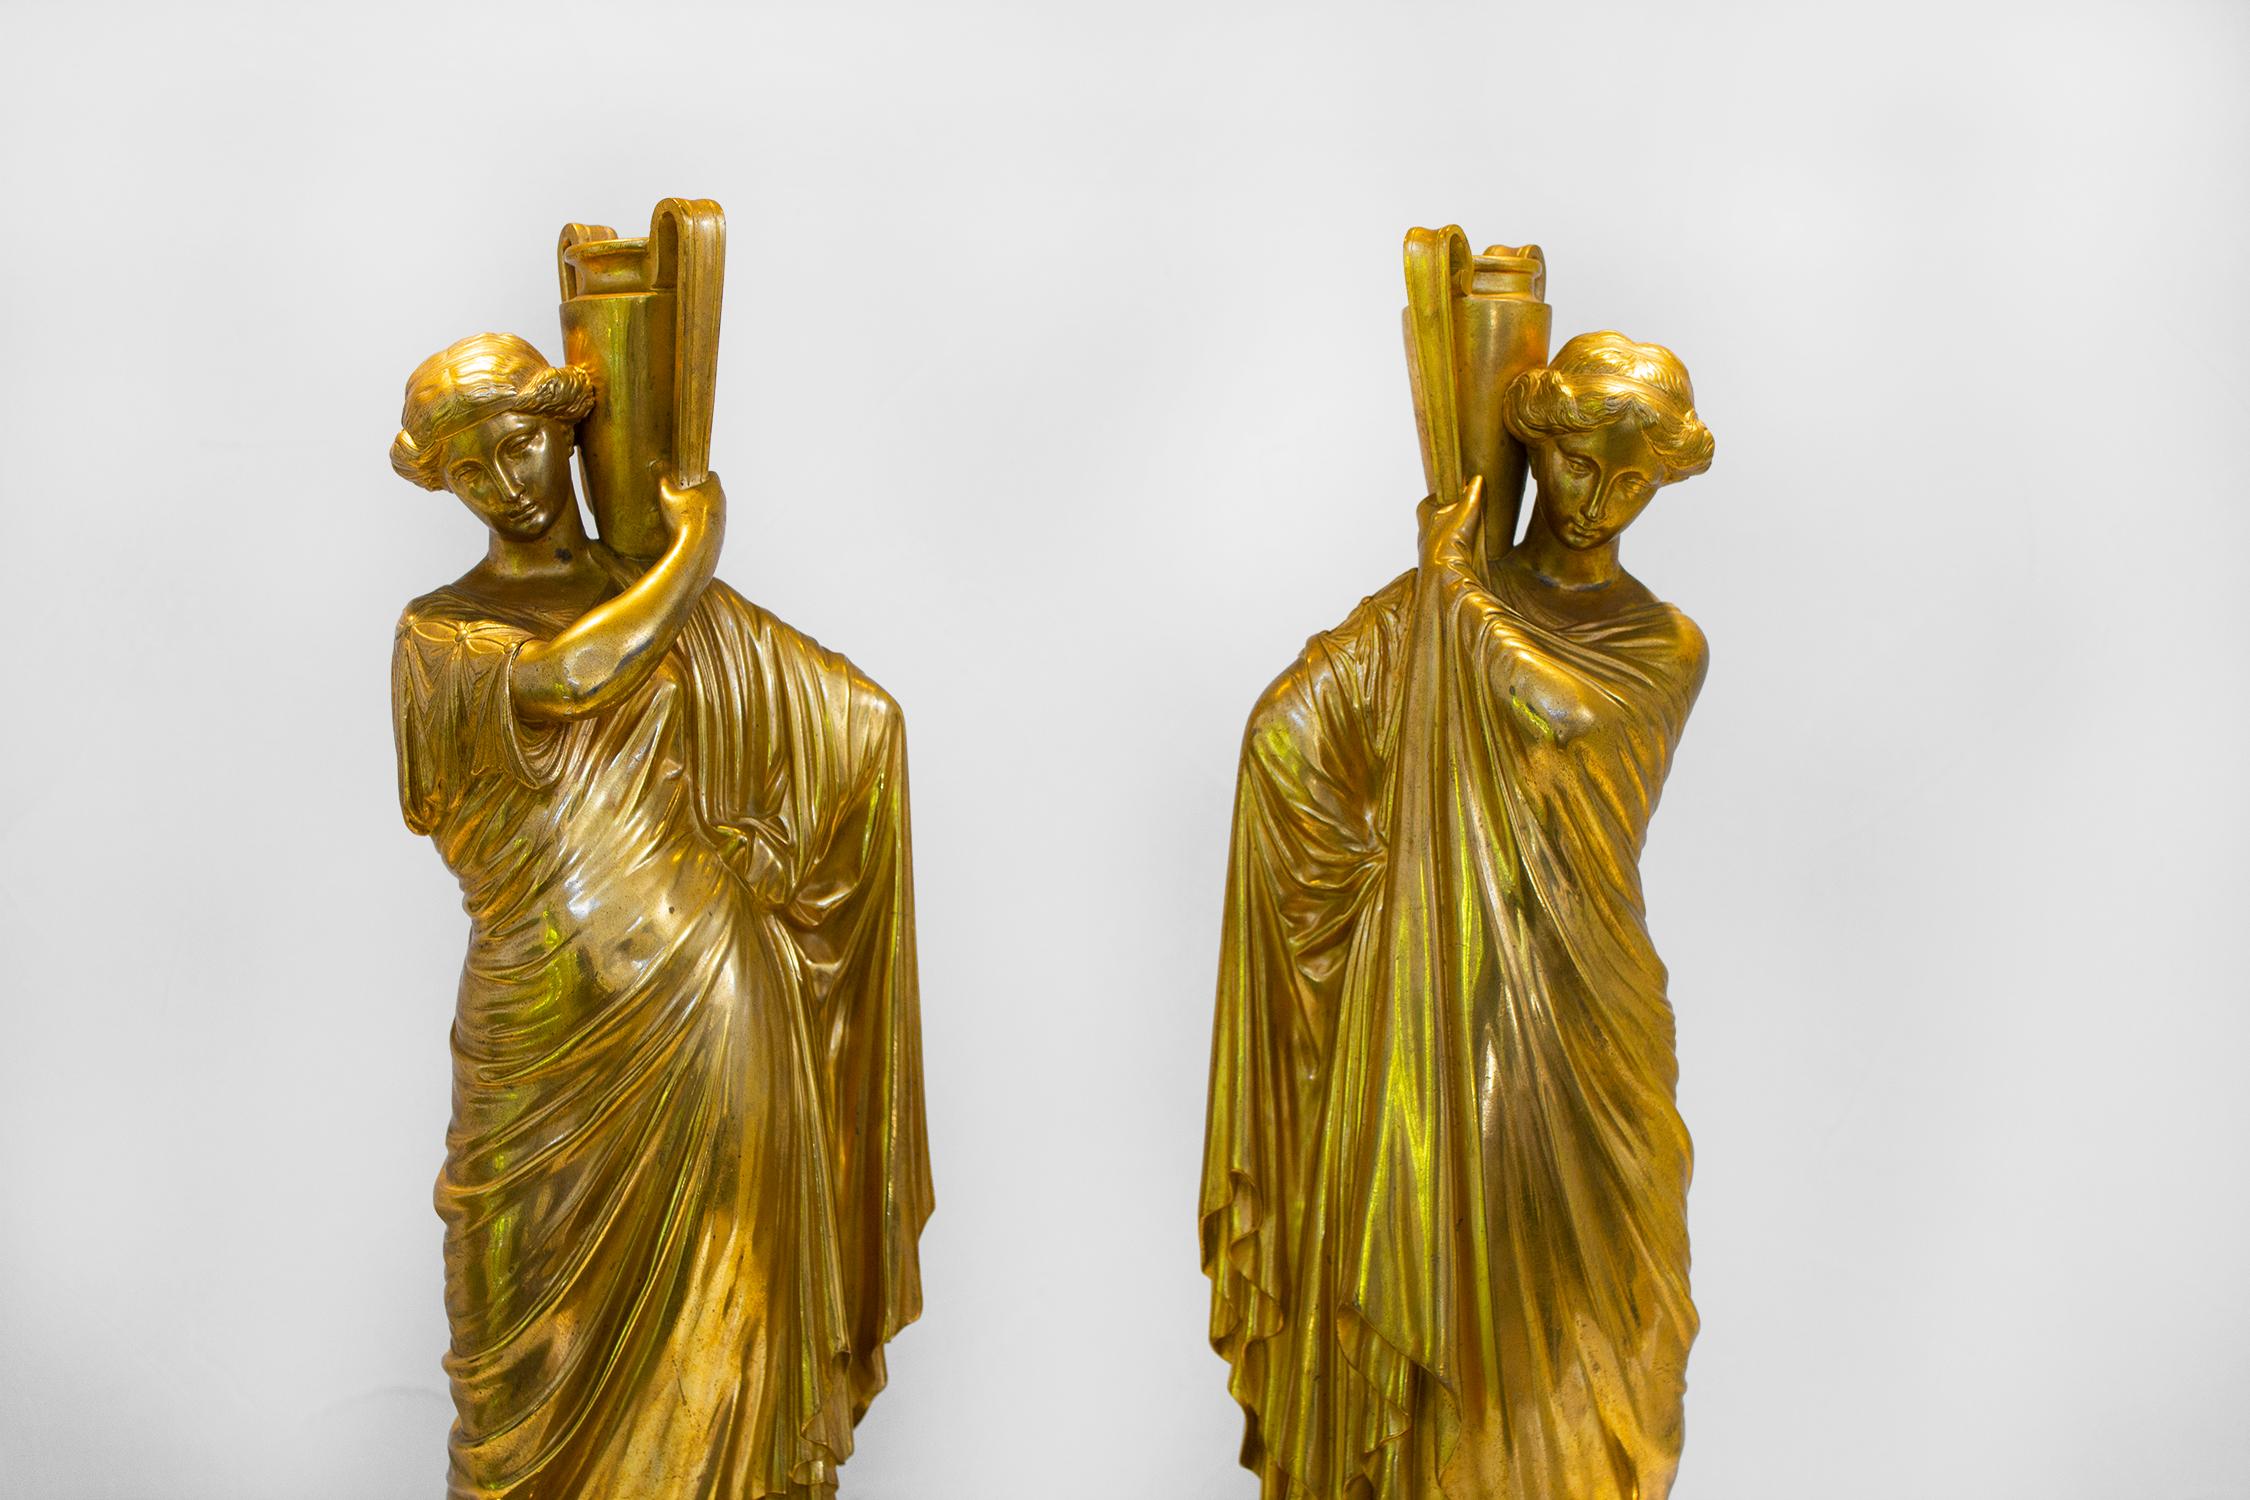 Gorgeous pair of antique golden cast bronze roman women on newly fabricated marble bases. They are hollow and the water jugs are open so they can be used to display an arrangement without water.